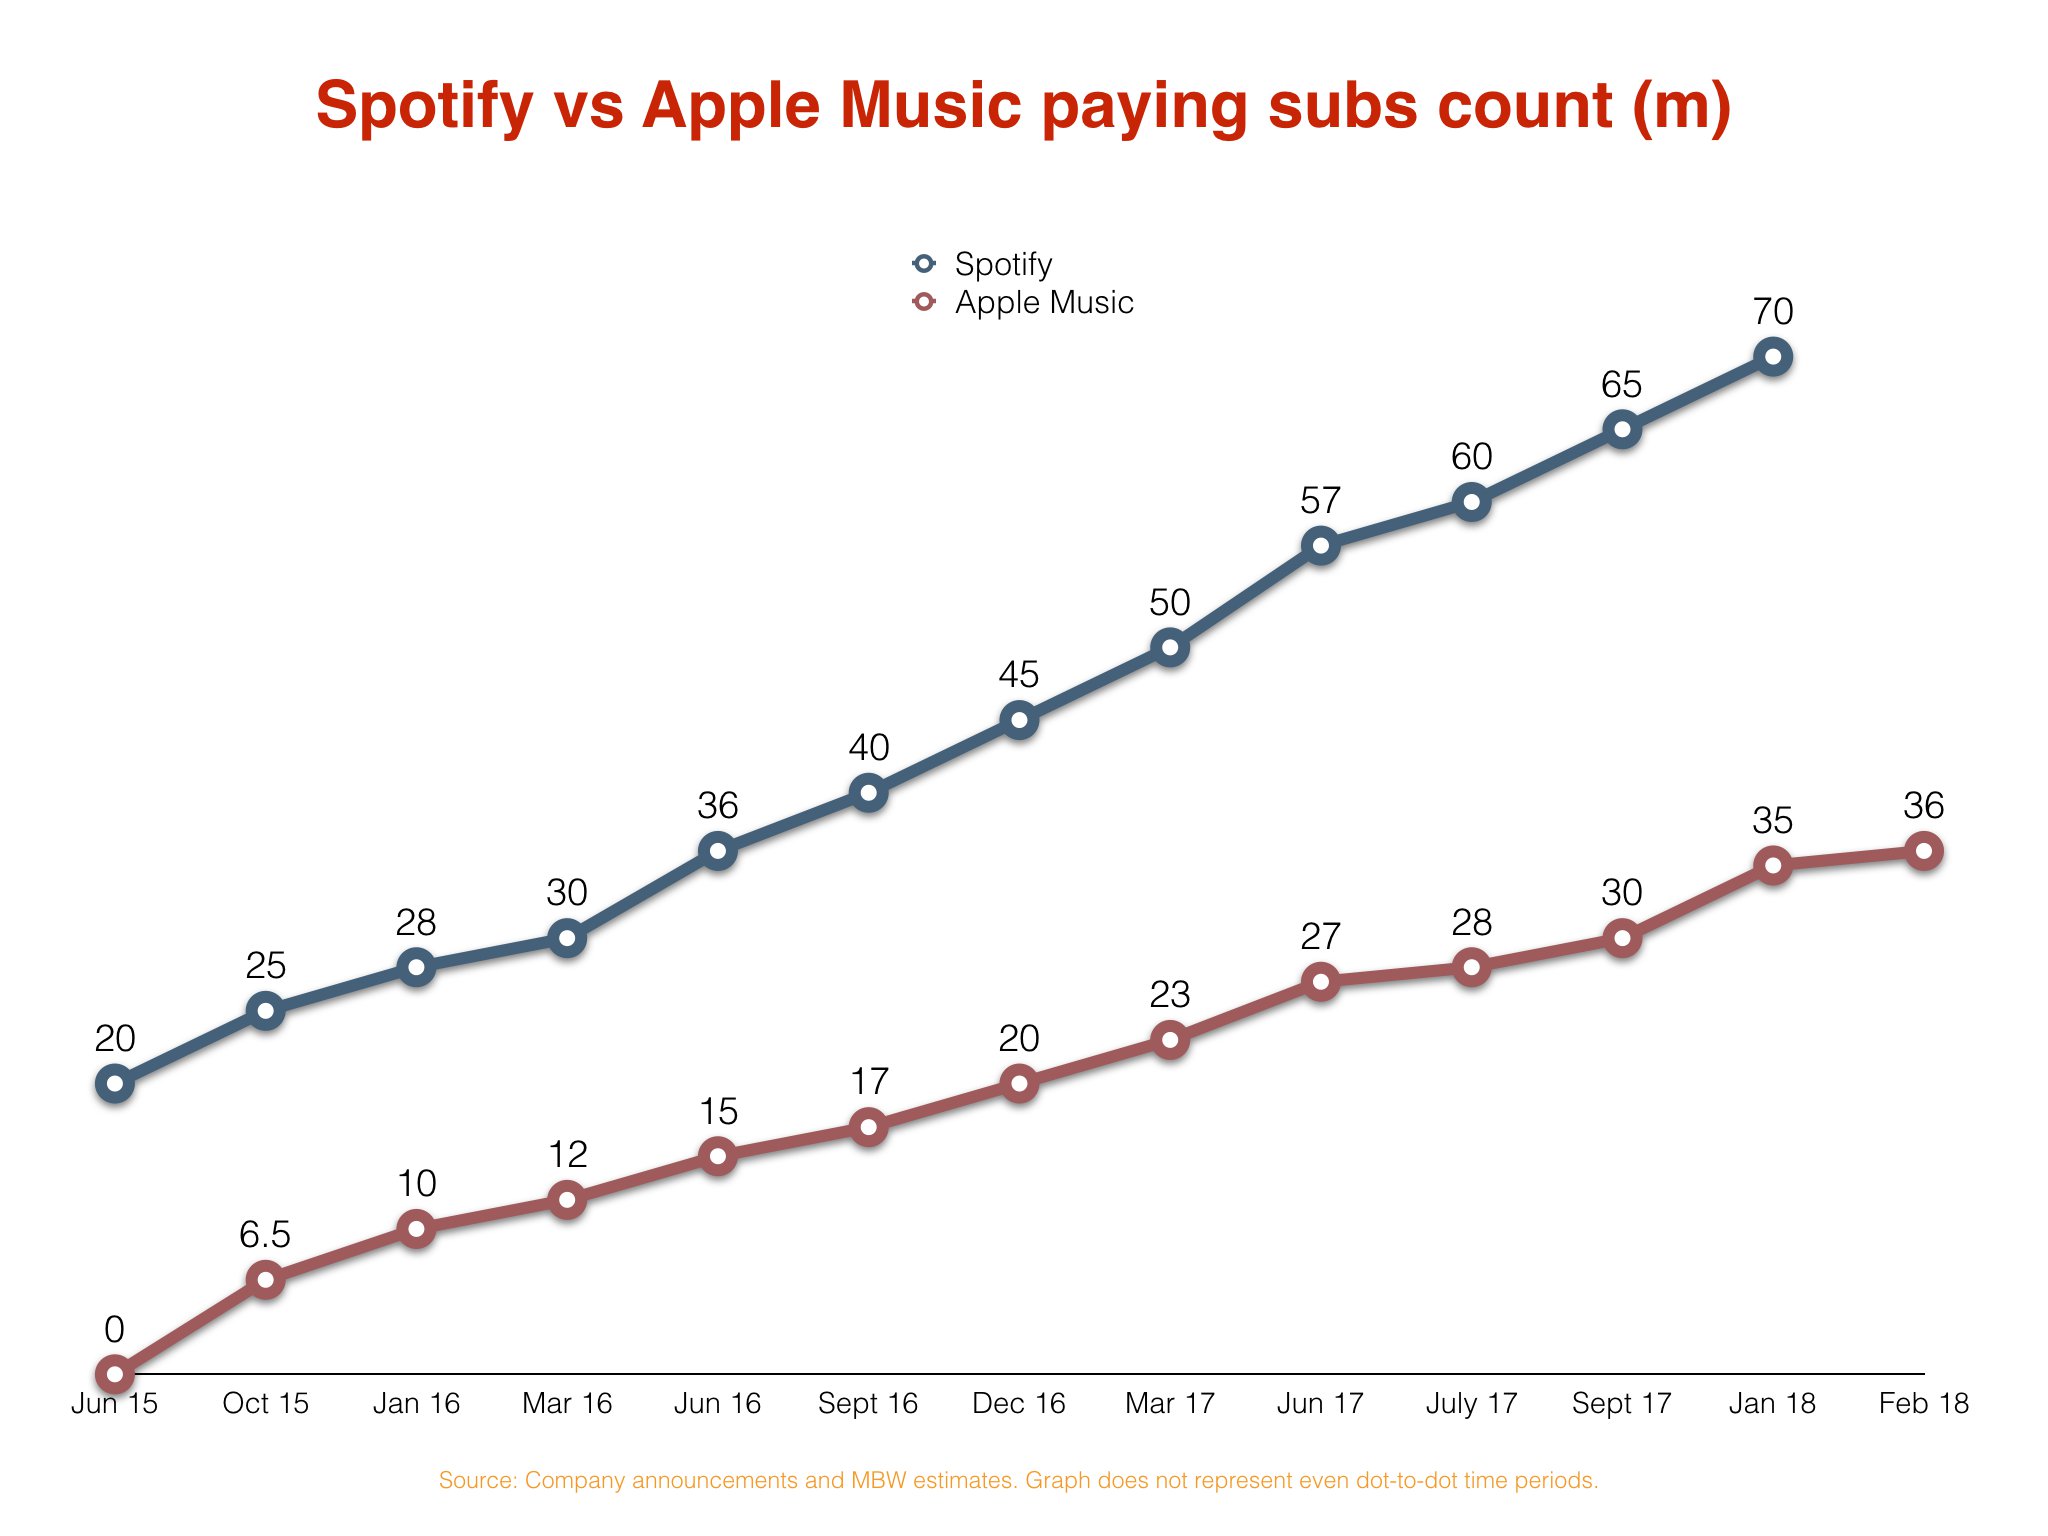 Apple Music gaining on Spotify with 1 million+ new subscribers a month